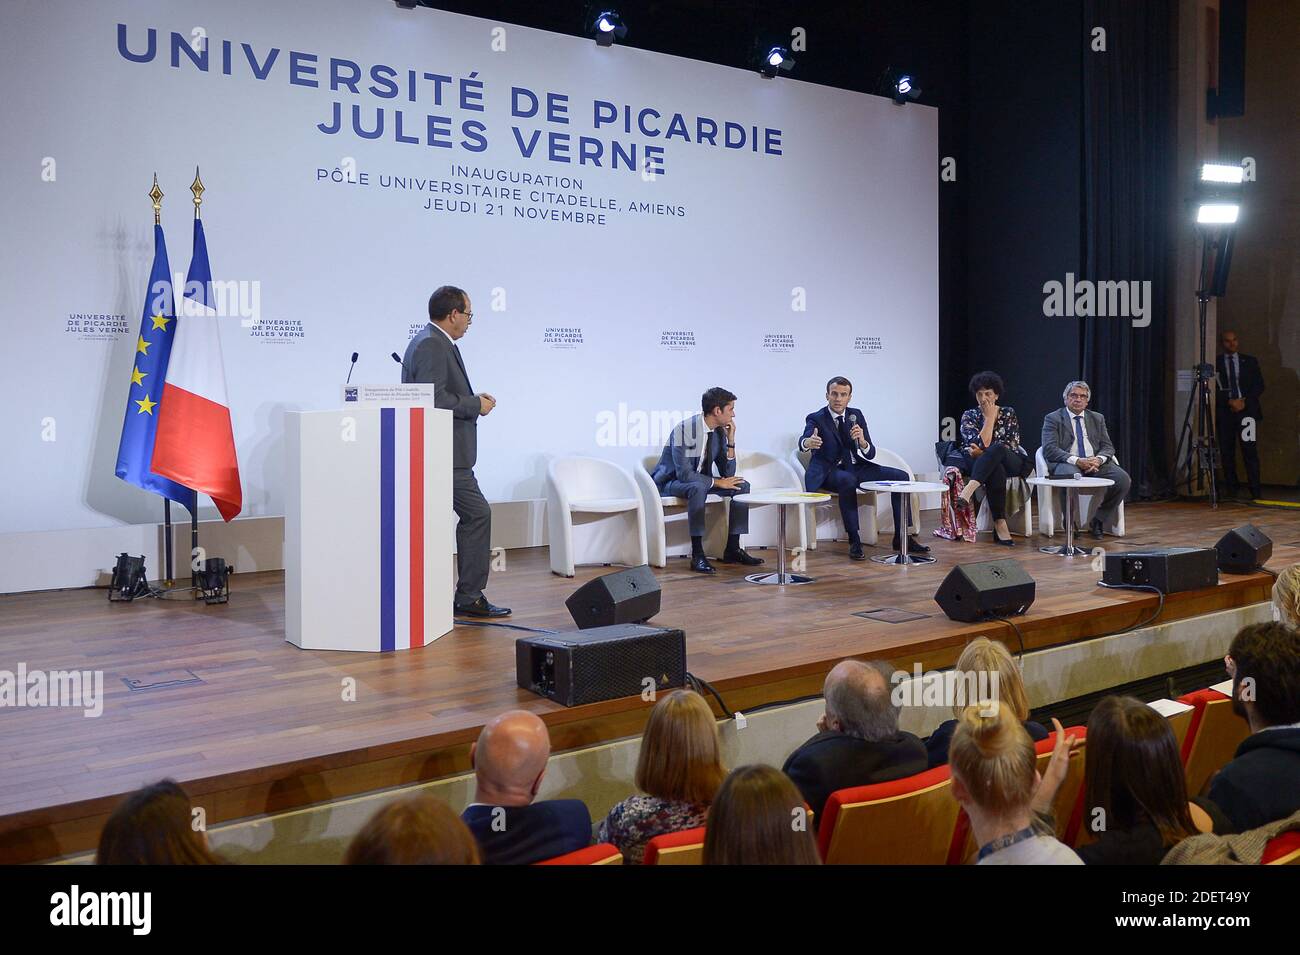 French President Emmanuel Macron, Gabriel Attal, Minister of State, attached to the Minister of National Education and Youth, Frederique Vidal, Minister of Higher Education, Research and Innovation - French President Emmanuel Macron visits the new university pole of the University Jules Verne, located in the heart of the Citadel of Amiens, listed building of the early seventeenth century redesigned by the architect Renzo Piano, and meeting with the students outside and Gabriel Attal, Frederique Vidal. Then presentation of the HUB energy - Tiamat start up and GRECO innovation by Professor of th Stock Photo